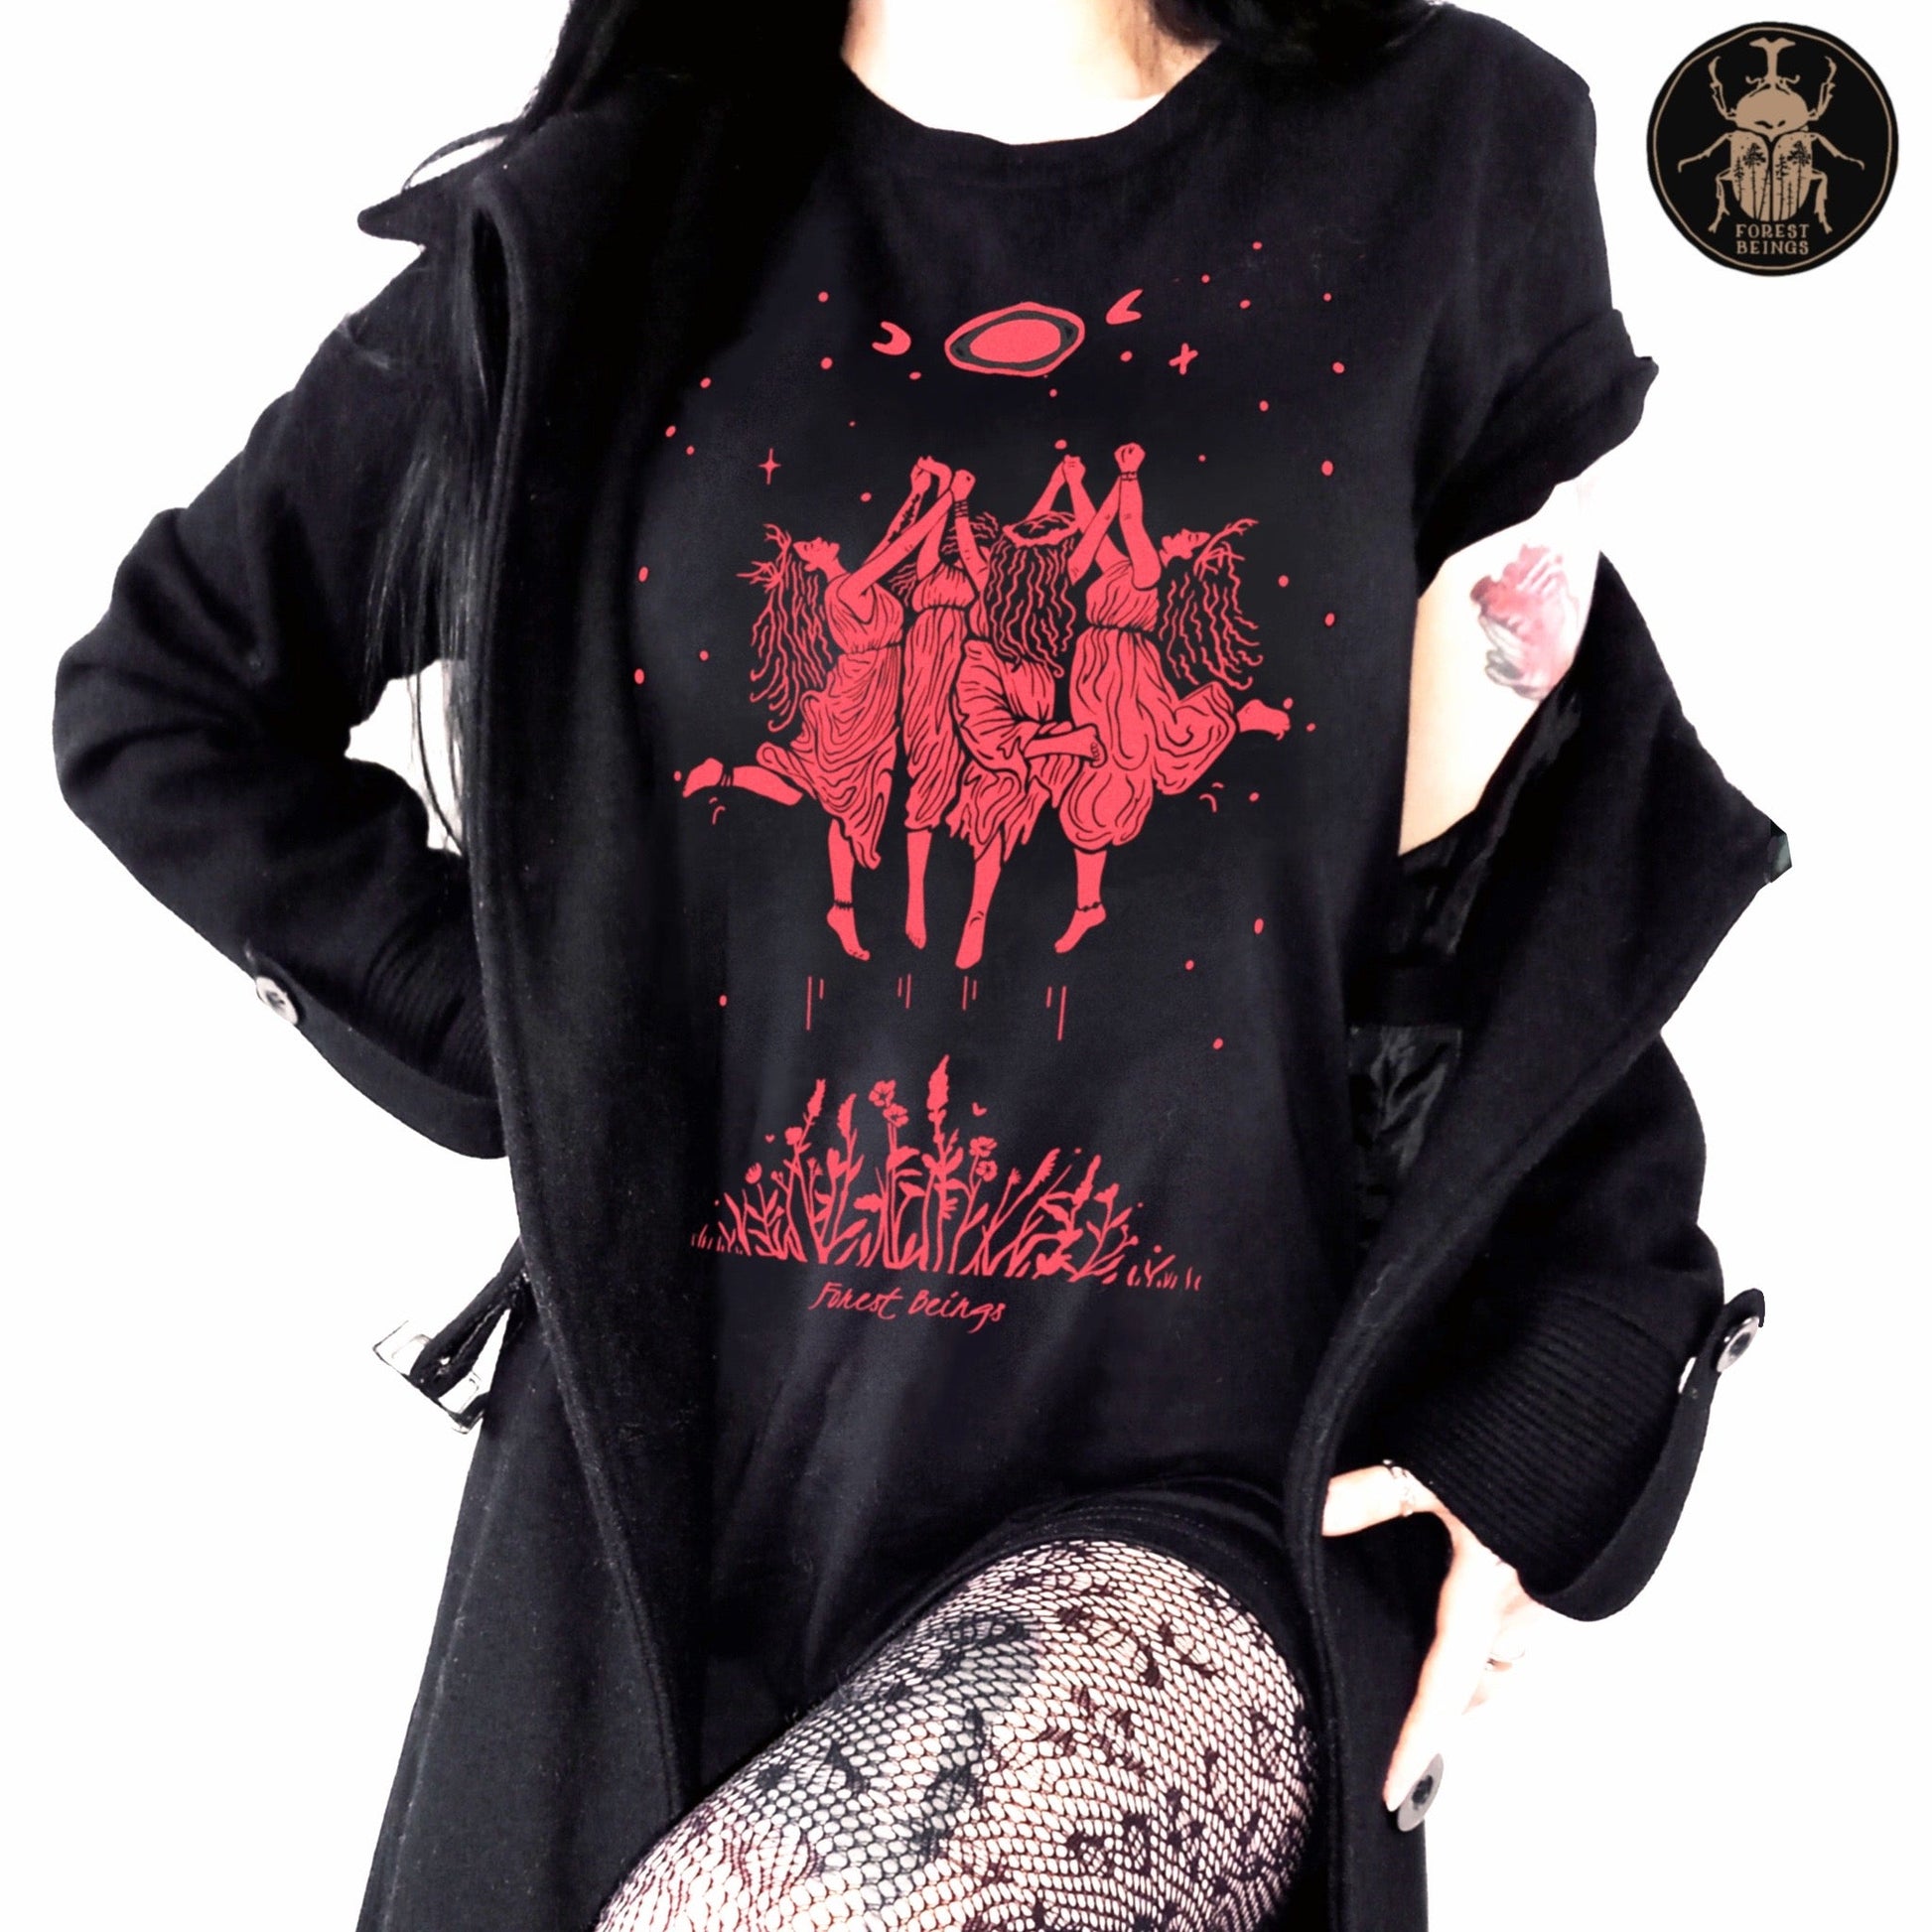 Witchy graphic t-shirt where witches are dancing in the air, in a sabbath ritual like act. Cute witchy goth girl with long black hair and tattoos on her arms and legs, wearing an aesthetic goth graphic t-shirt. 